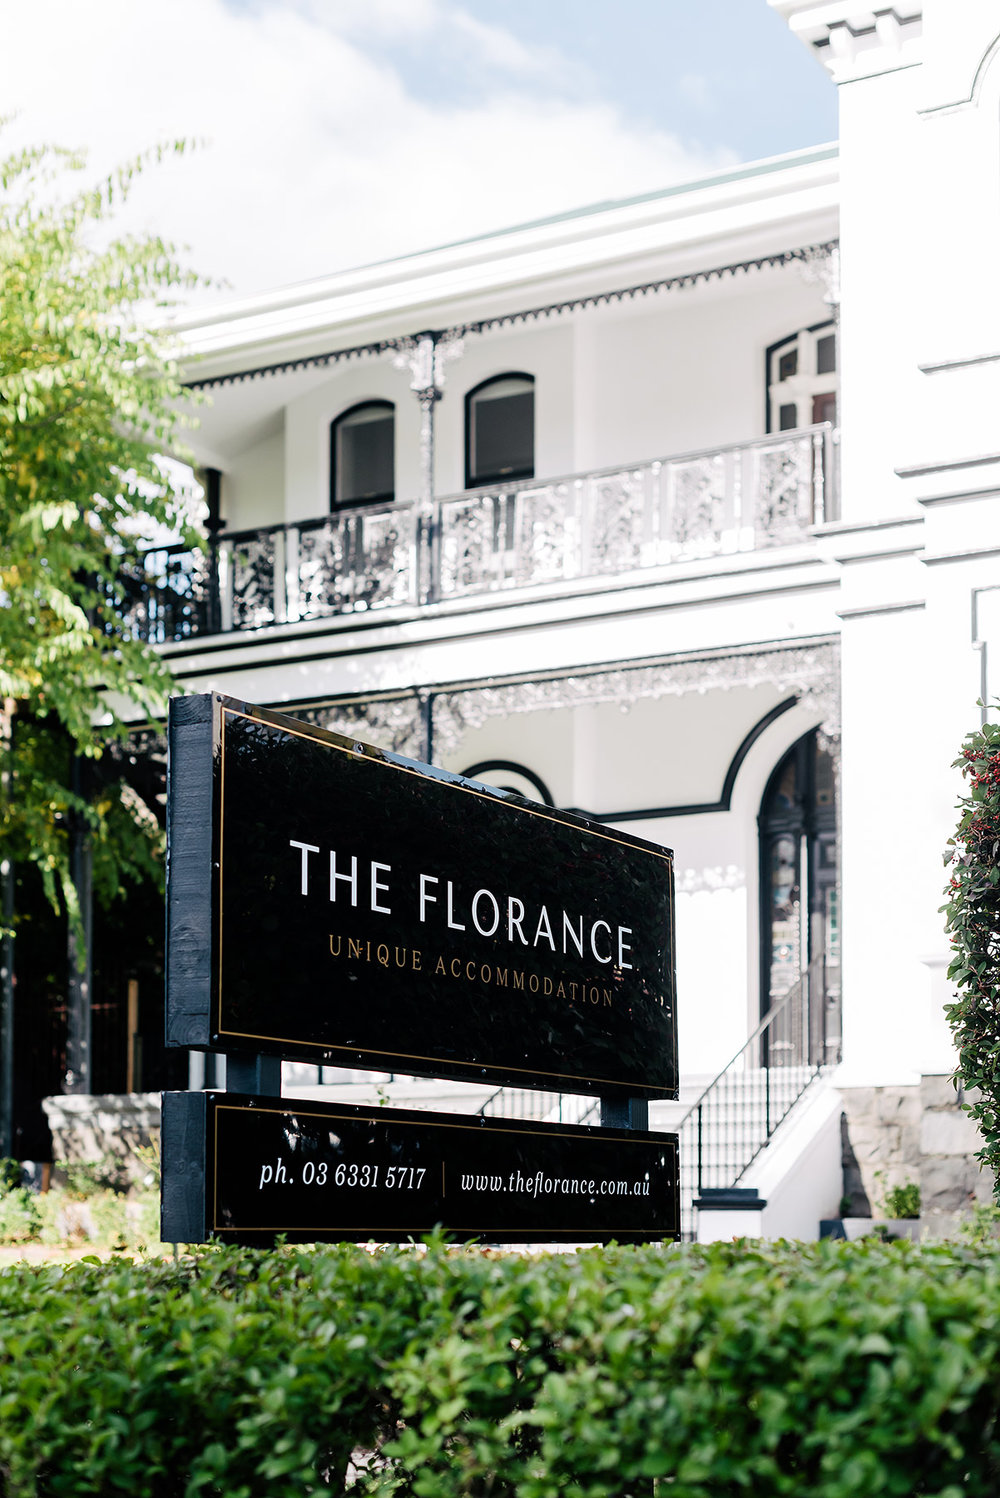 The Florance Contact Details — The Florance